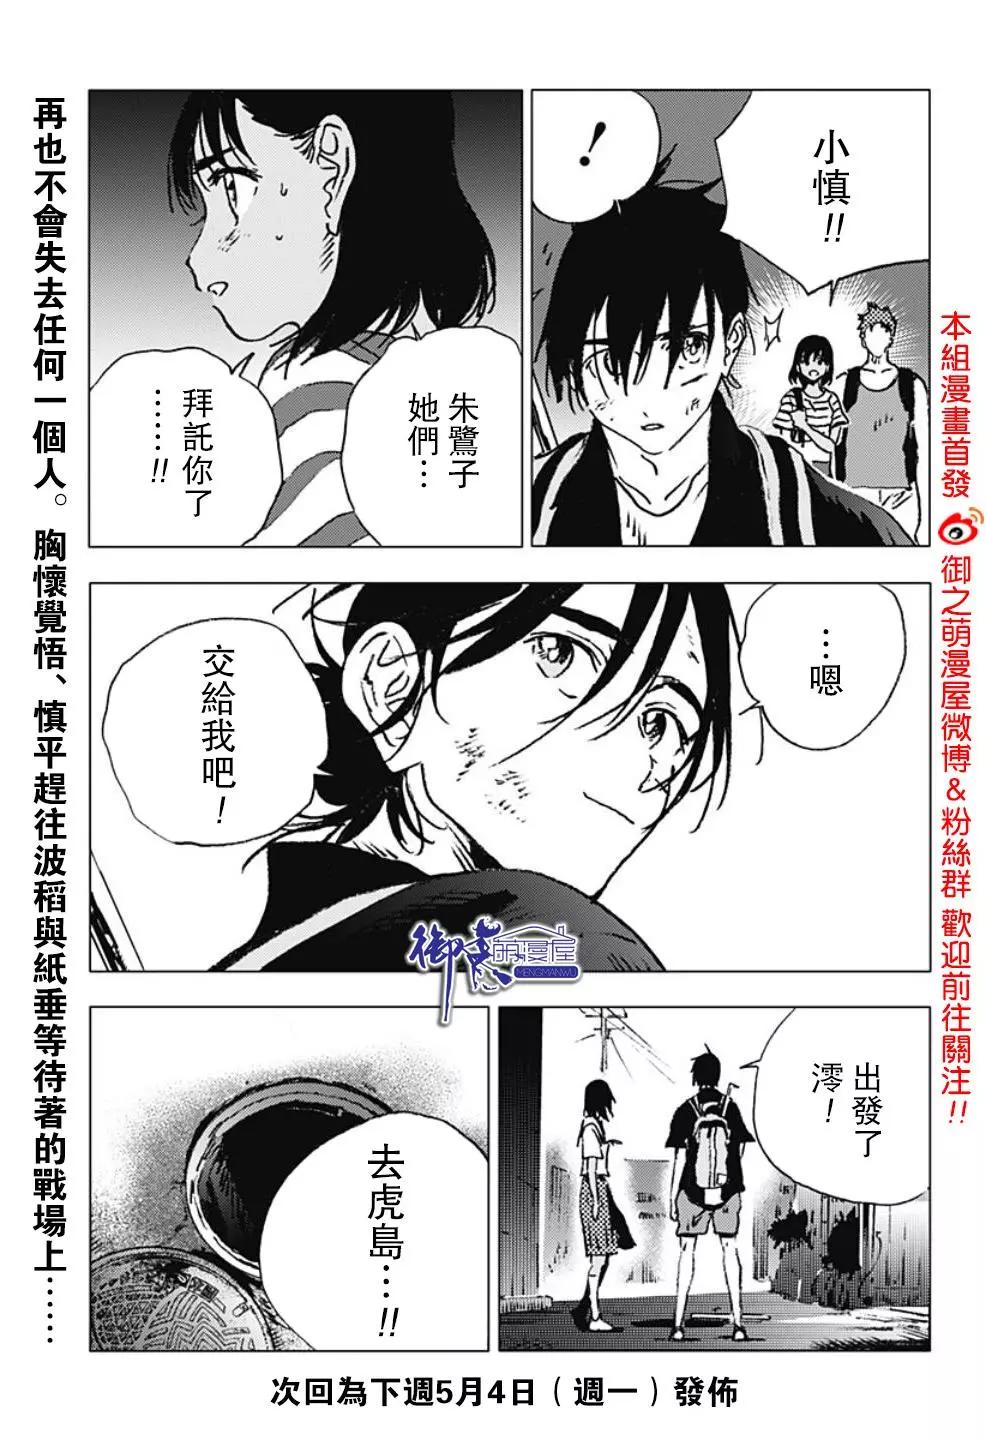 Summer time rendering - 第111話 - 1